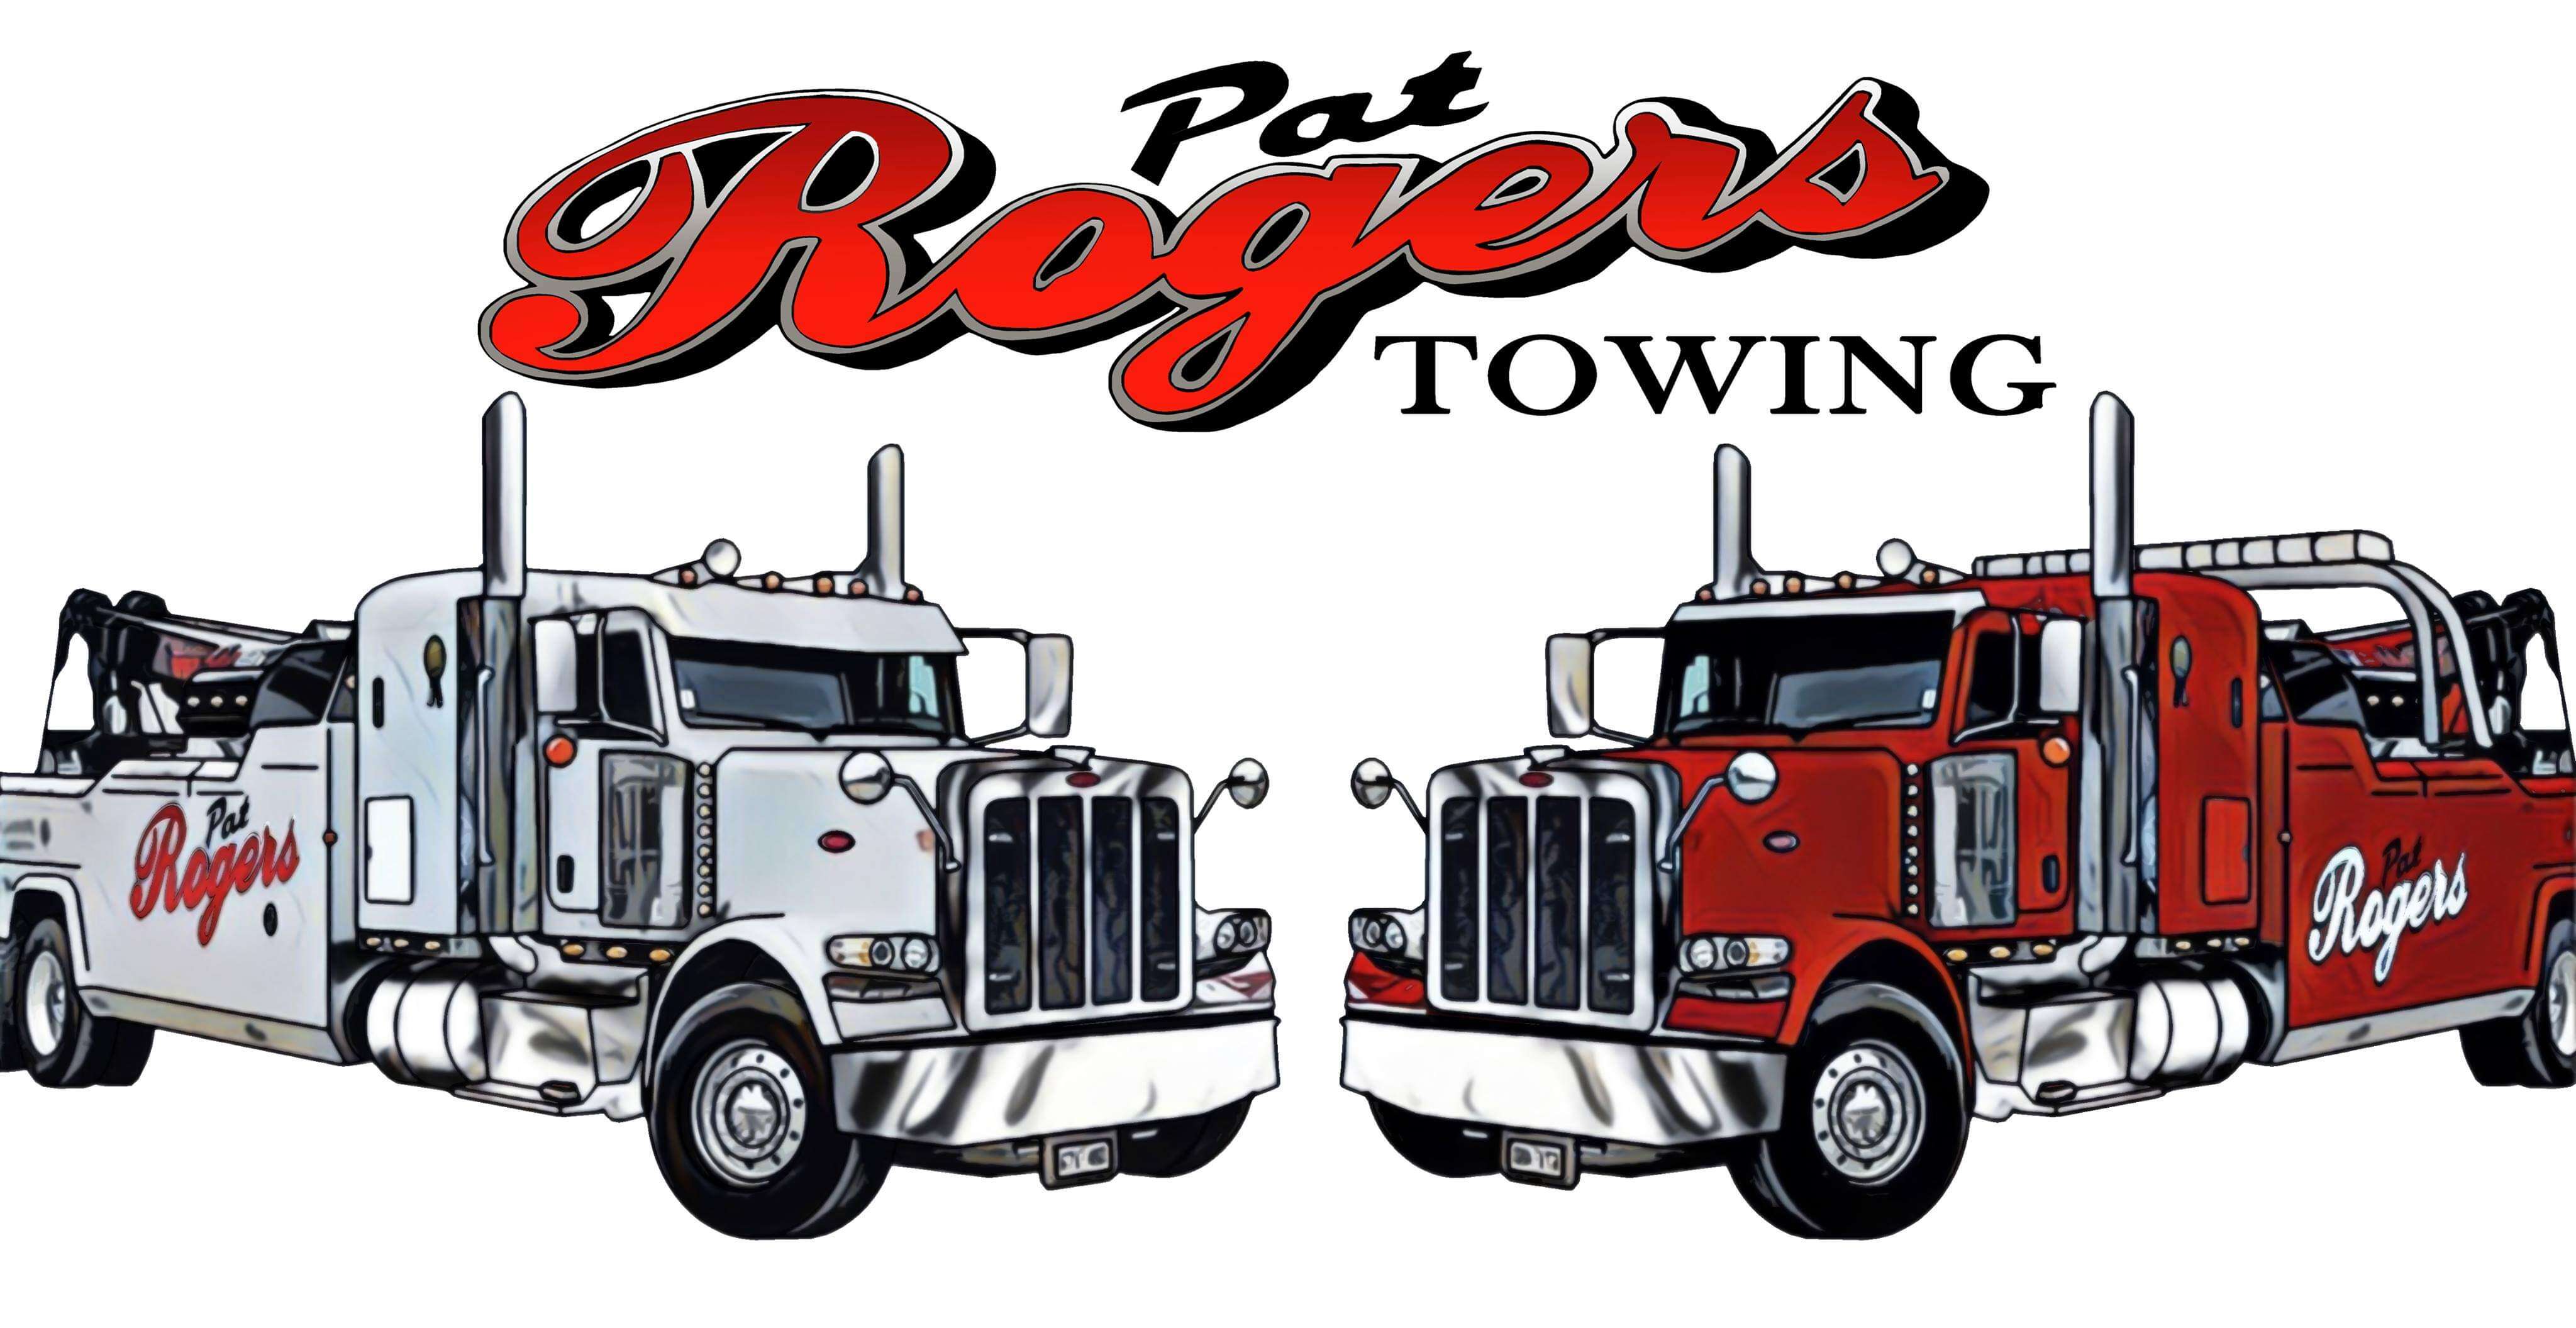 Pat Roger's Towing